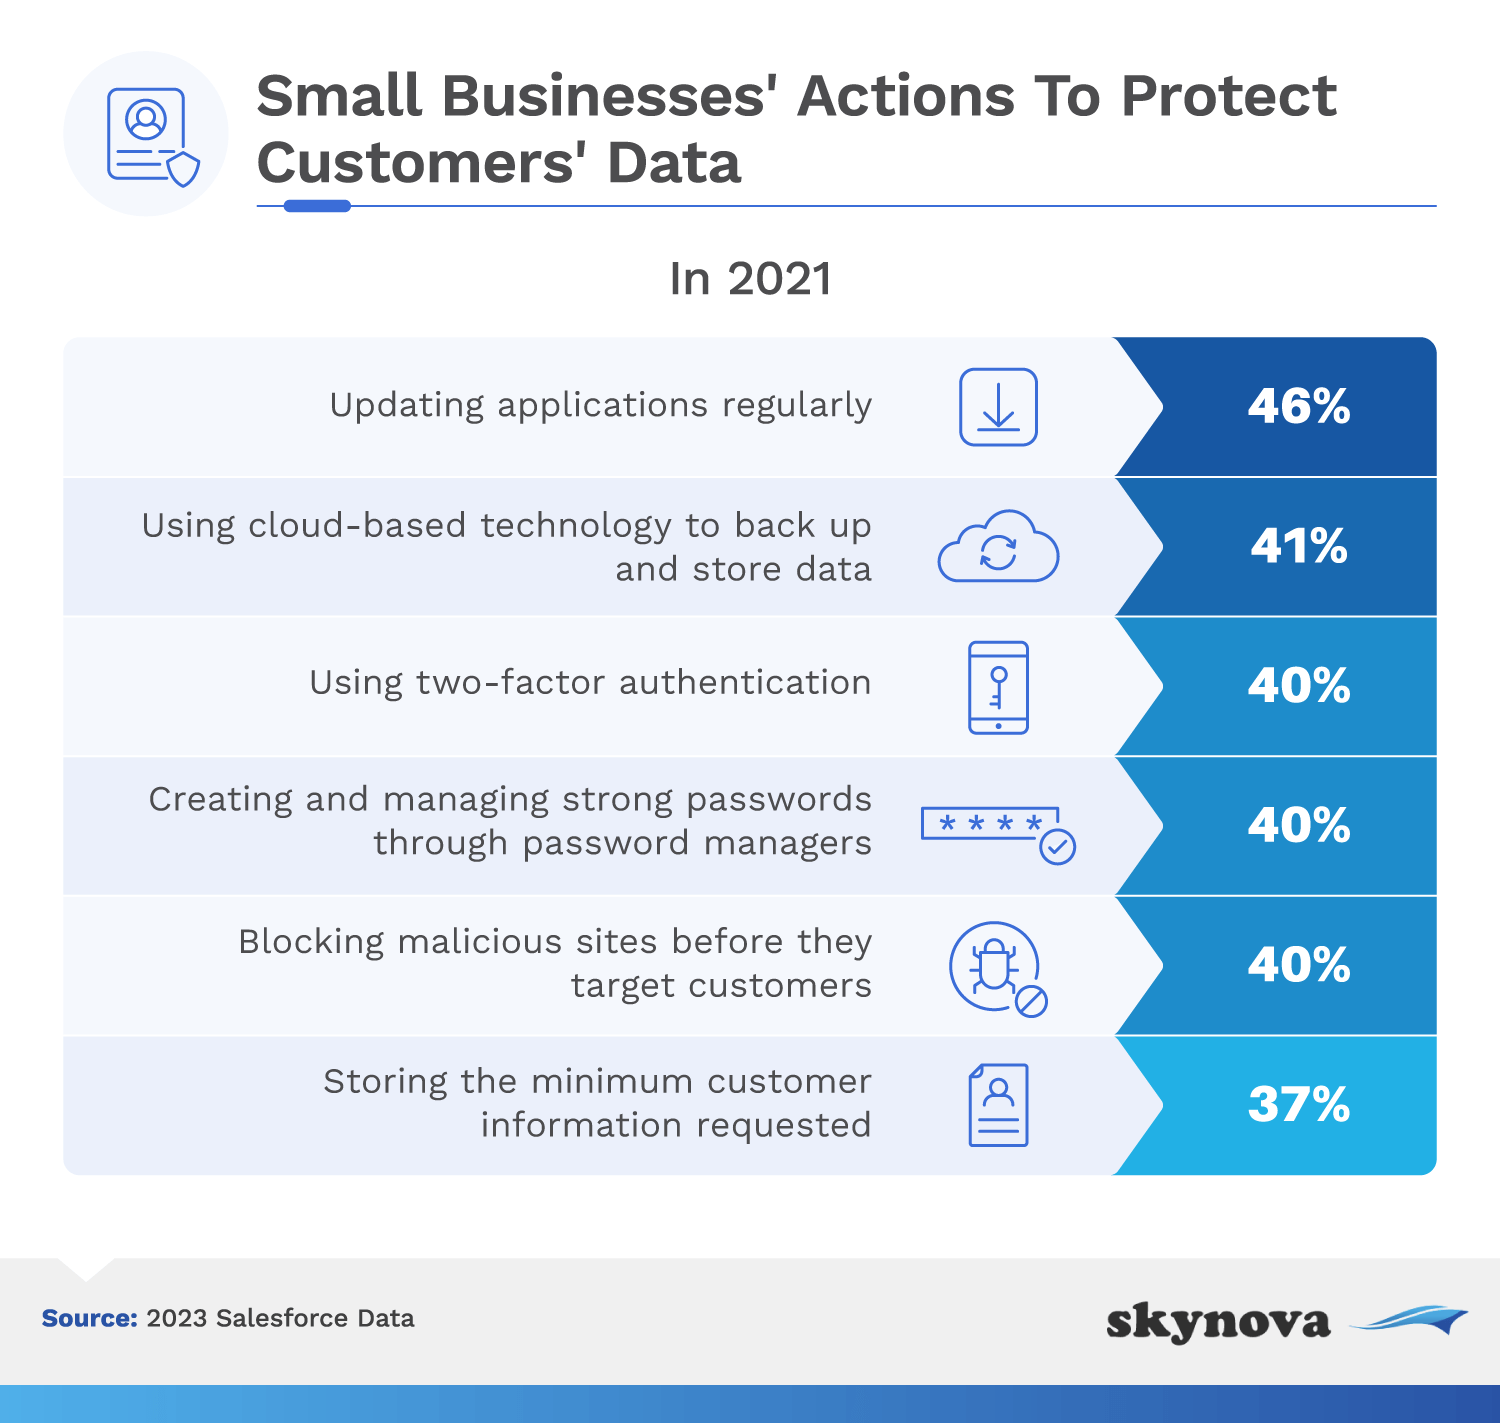 Small business actions to protect customer data